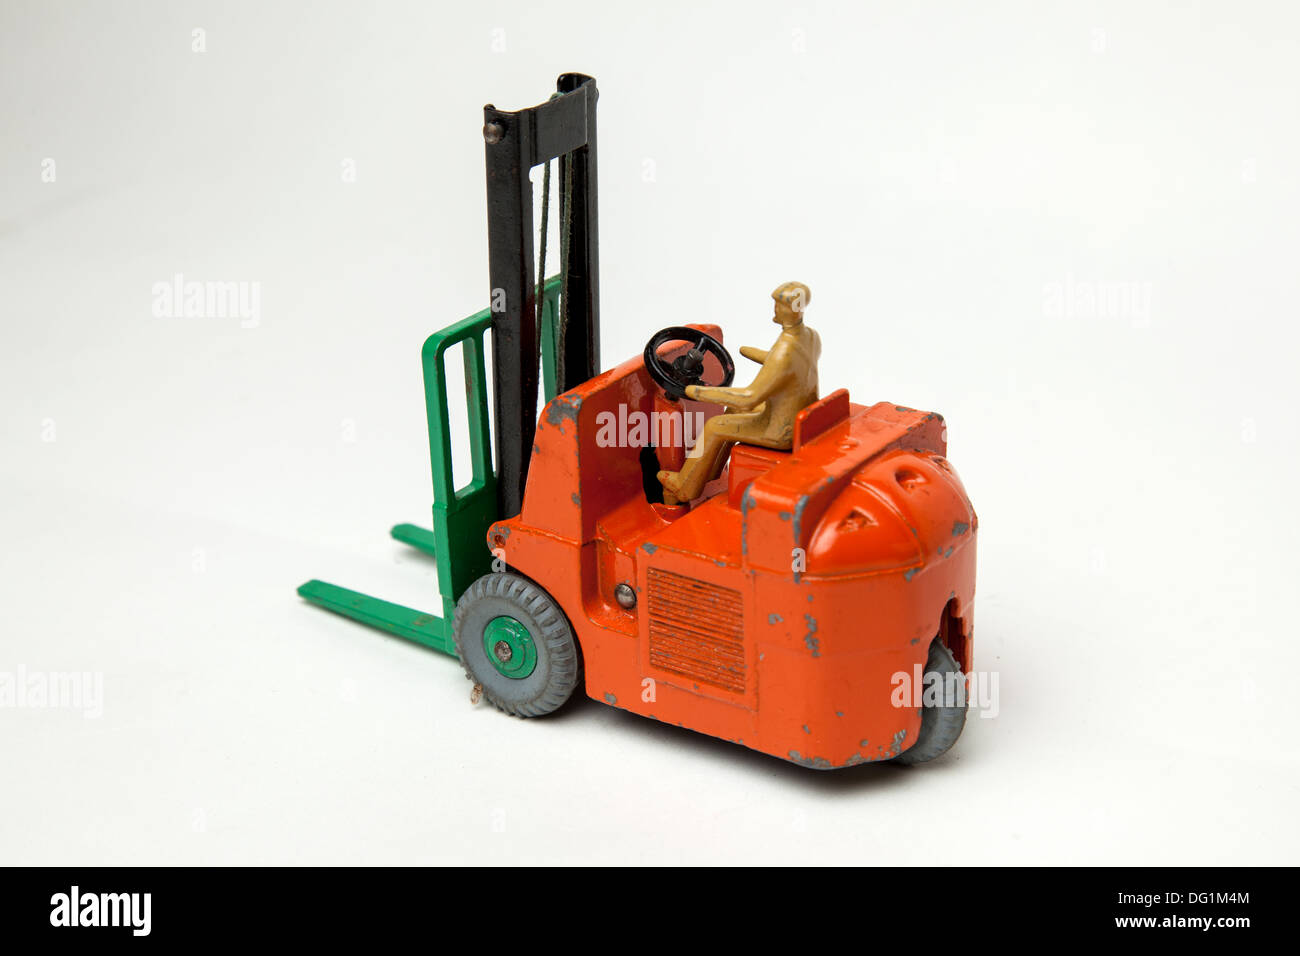 Dinky Toy fork lift truck 401 Stock Photo